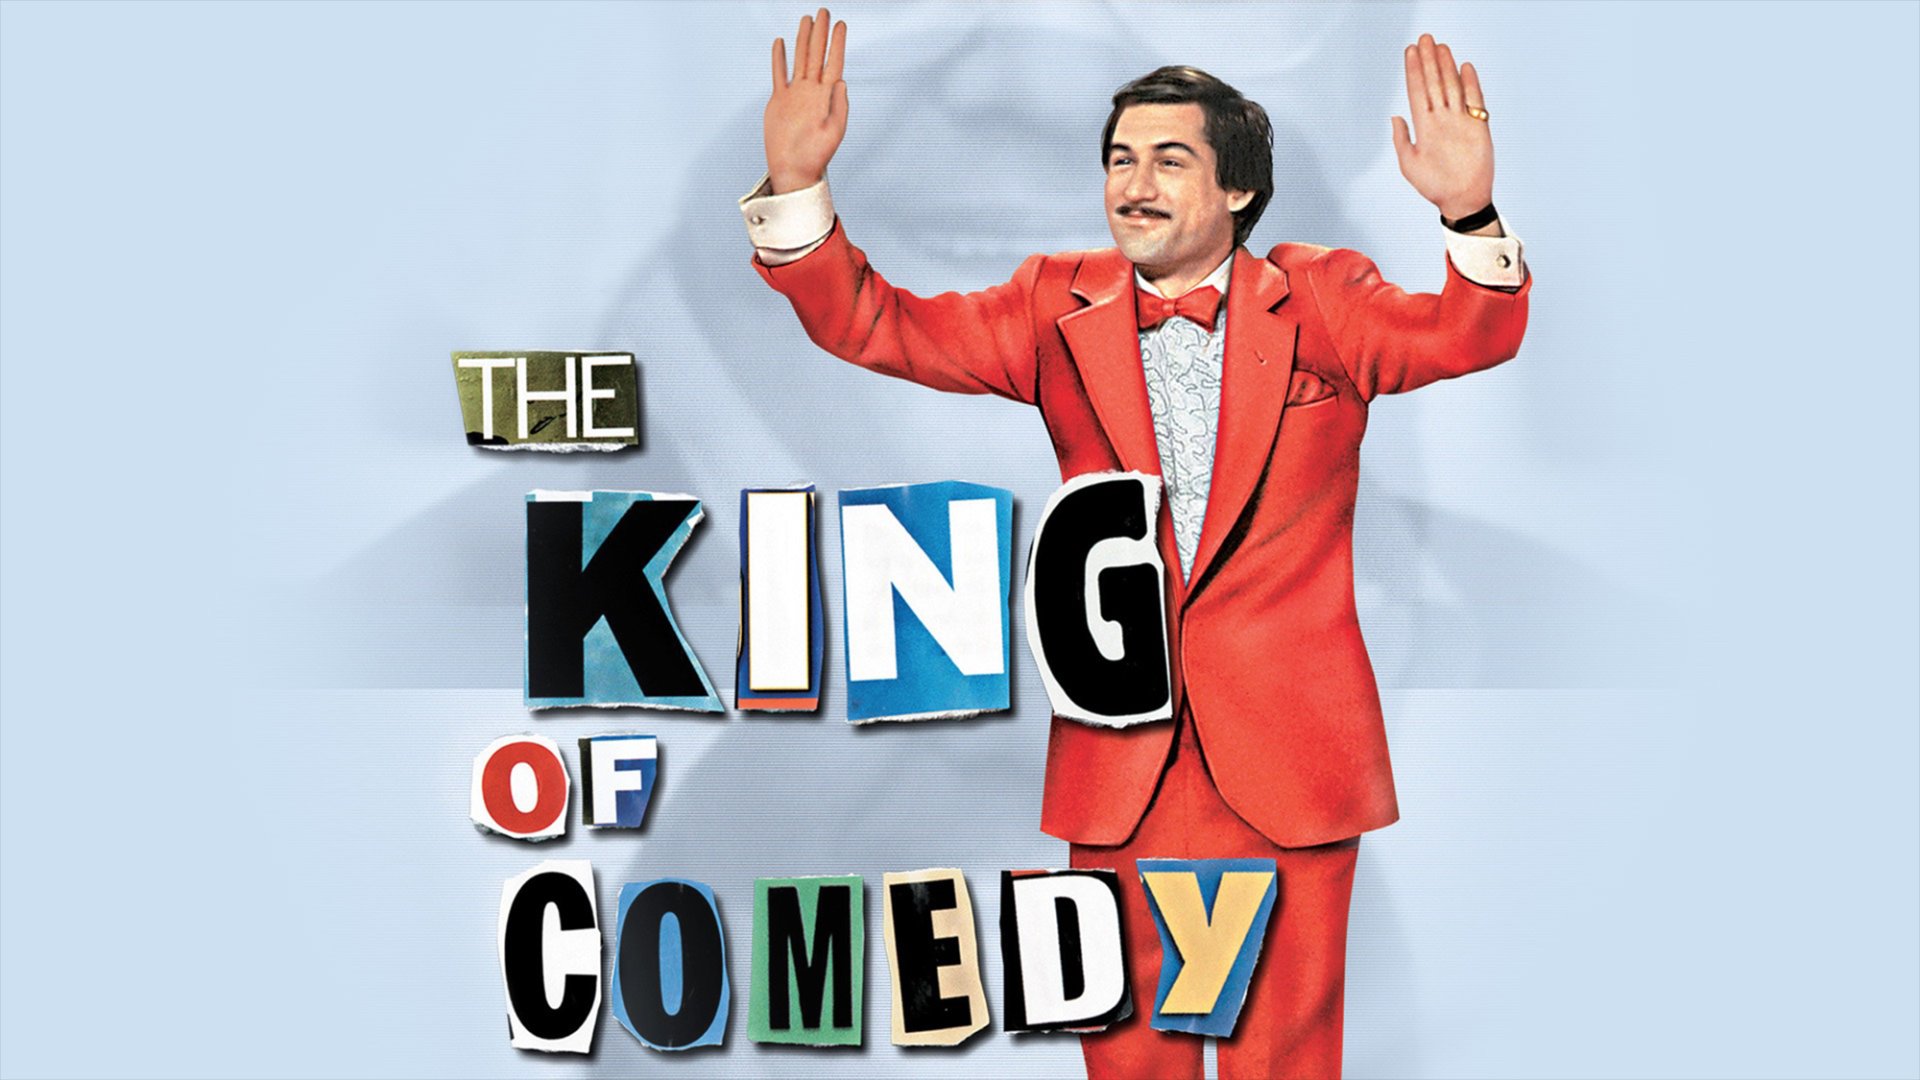 The King Of Comedy HD Wallpapers Achtergronden 1920x1080